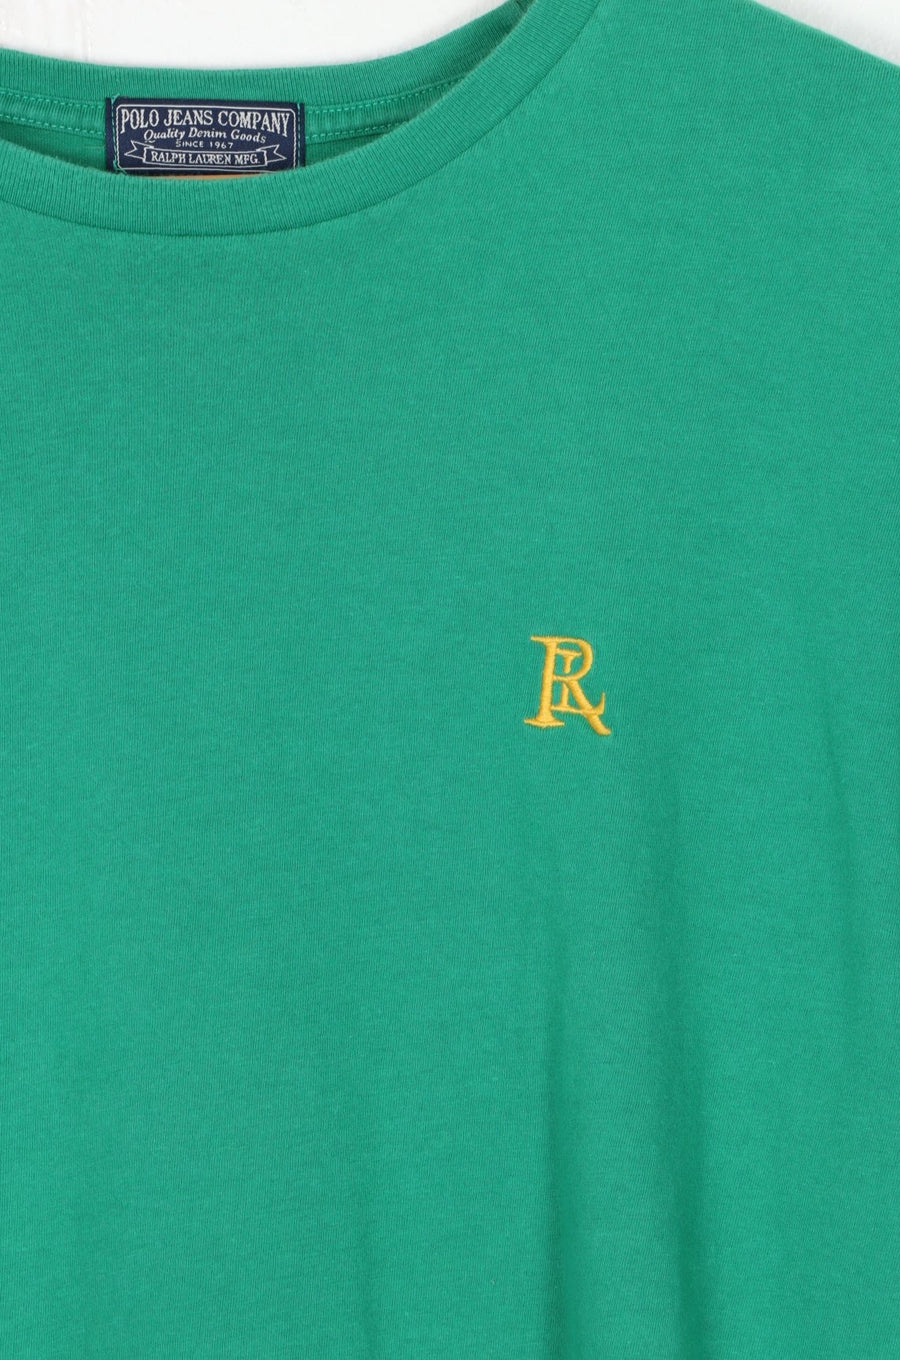 RALPH LAUREN POLO JEANS 90s Green Embroidered Initial Logo T-Shirt (L-XL)